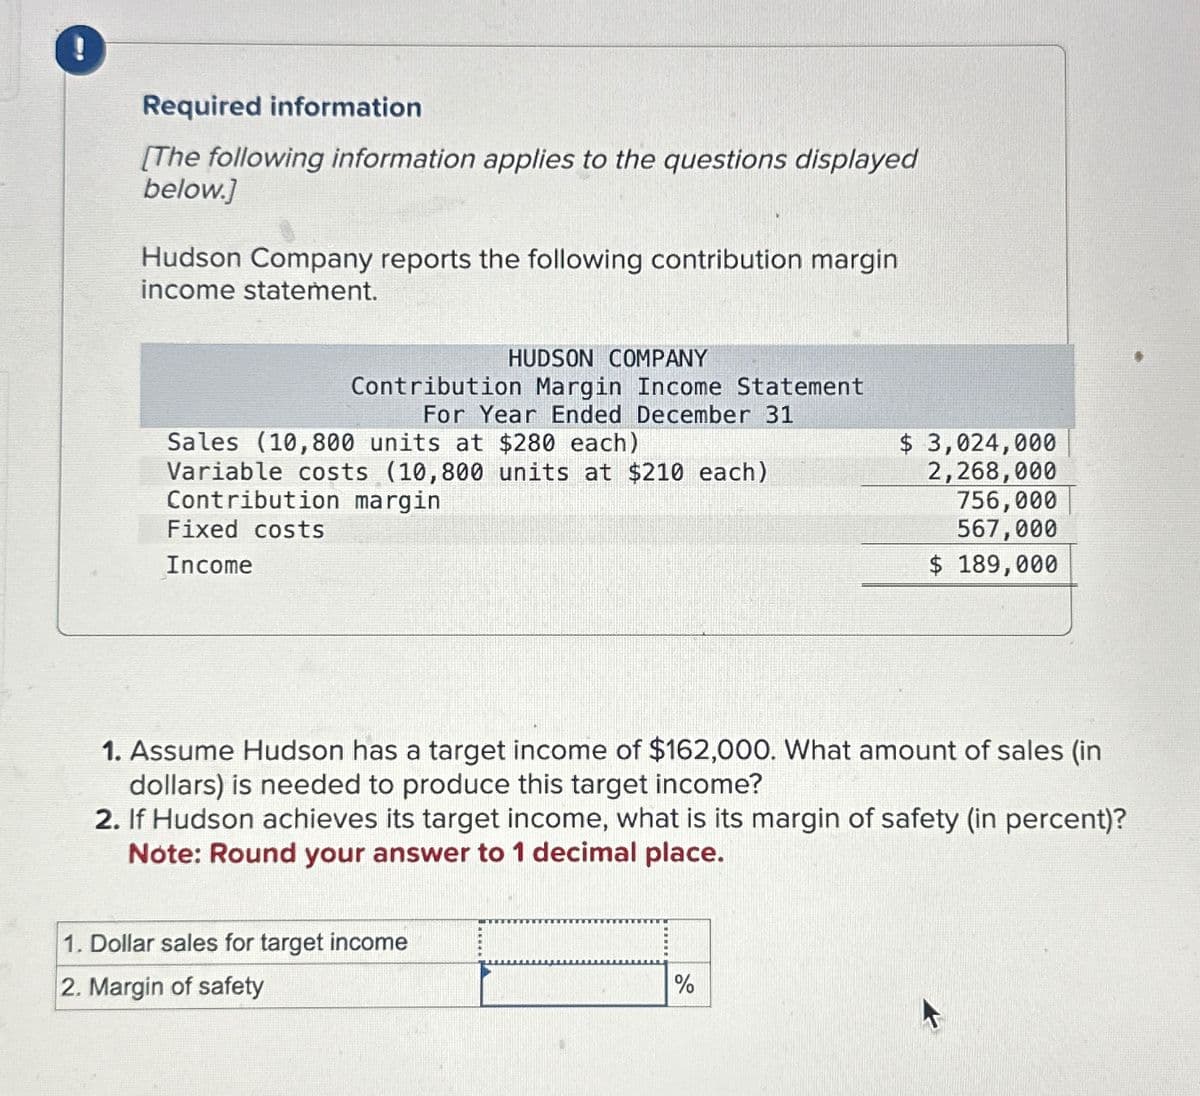 !
Required information
[The following information applies to the questions displayed
below.]
Hudson Company reports the following contribution margin
income statement.
HUDSON COMPANY
Contribution Margin Income Statement
For Year Ended December 31
Sales (10,800 units at $280 each)
Variable costs (10,800 units at $210 each)
Contribution margin
Fixed costs
Income
$ 3,024,000
2,268,000
756,000
567,000
$ 189,000
1. Assume Hudson has a target income of $162,000. What amount of sales (in
dollars) is needed to produce this target income?
2. If Hudson achieves its target income, what is its margin of safety (in percent)?
Note: Round your answer to 1 decimal place.
1. Dollar sales for target income
2. Margin of safety
%